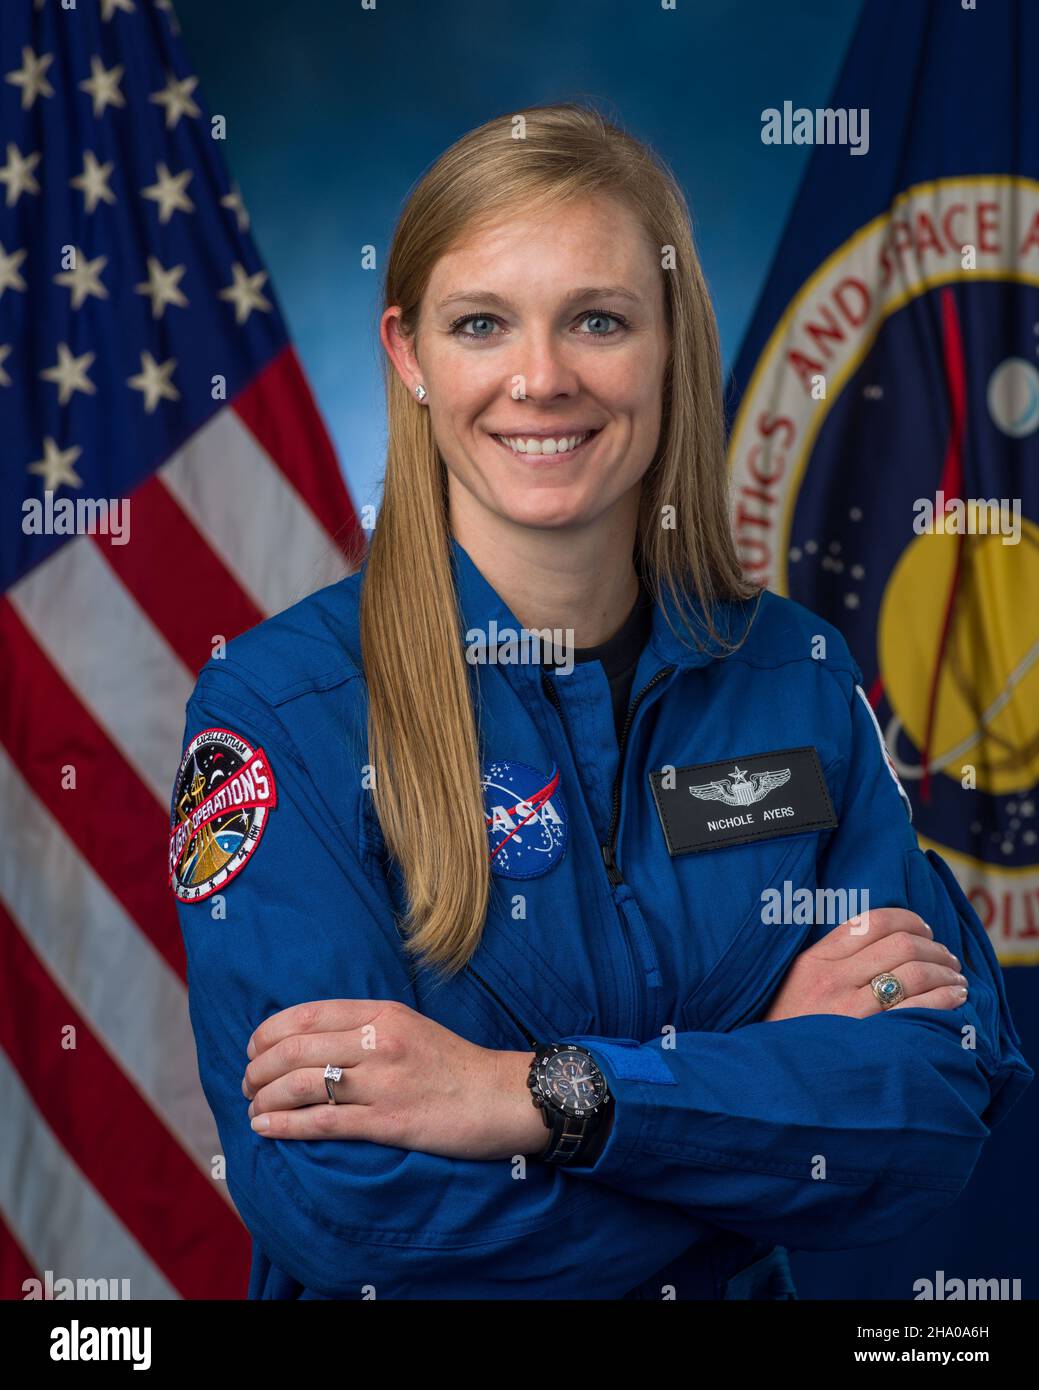 Houston, United States. 03 December, 2021. NASA astronaut candidate Nichole Ayers, poses for his official portrait at the Johnson Space Center, December 3, 2021 in Houston, Texas. Ayers is one of ten new astronaut candidates chosen by NASA.  Credit: Robert Markowitz/NASA/Alamy Live News Stock Photo